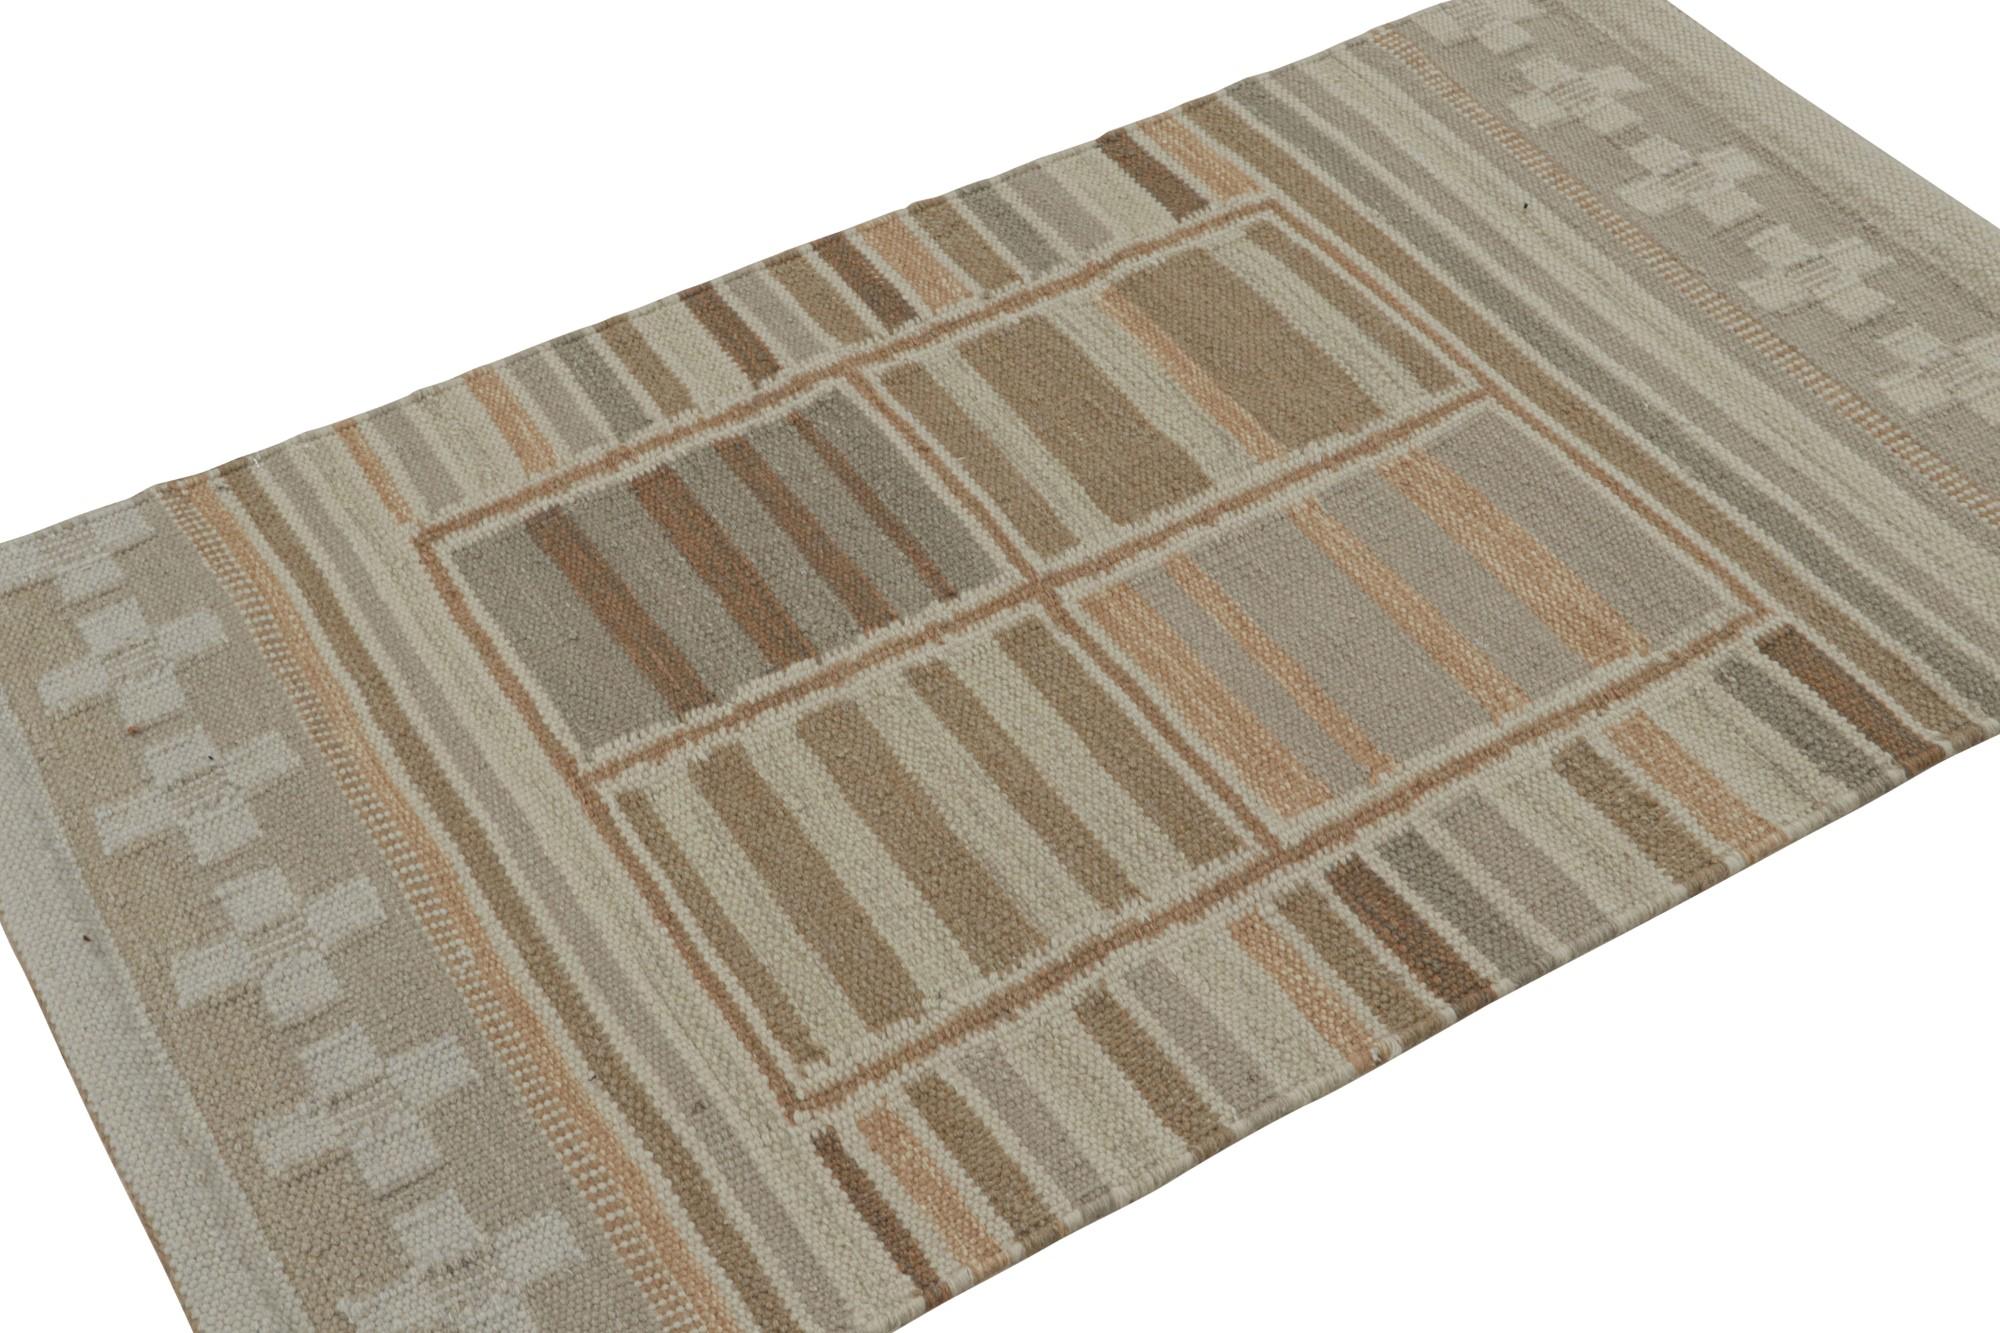 Hand-knotted in wool and natural yarns, this 3x5 Scandinavian kilim and scatter rug features geometric patterns in gray and blue, and is an exciting new addition to the Rug & Kilim collection. 
 
On the Design: 

This kilim enjoys geometric patterns